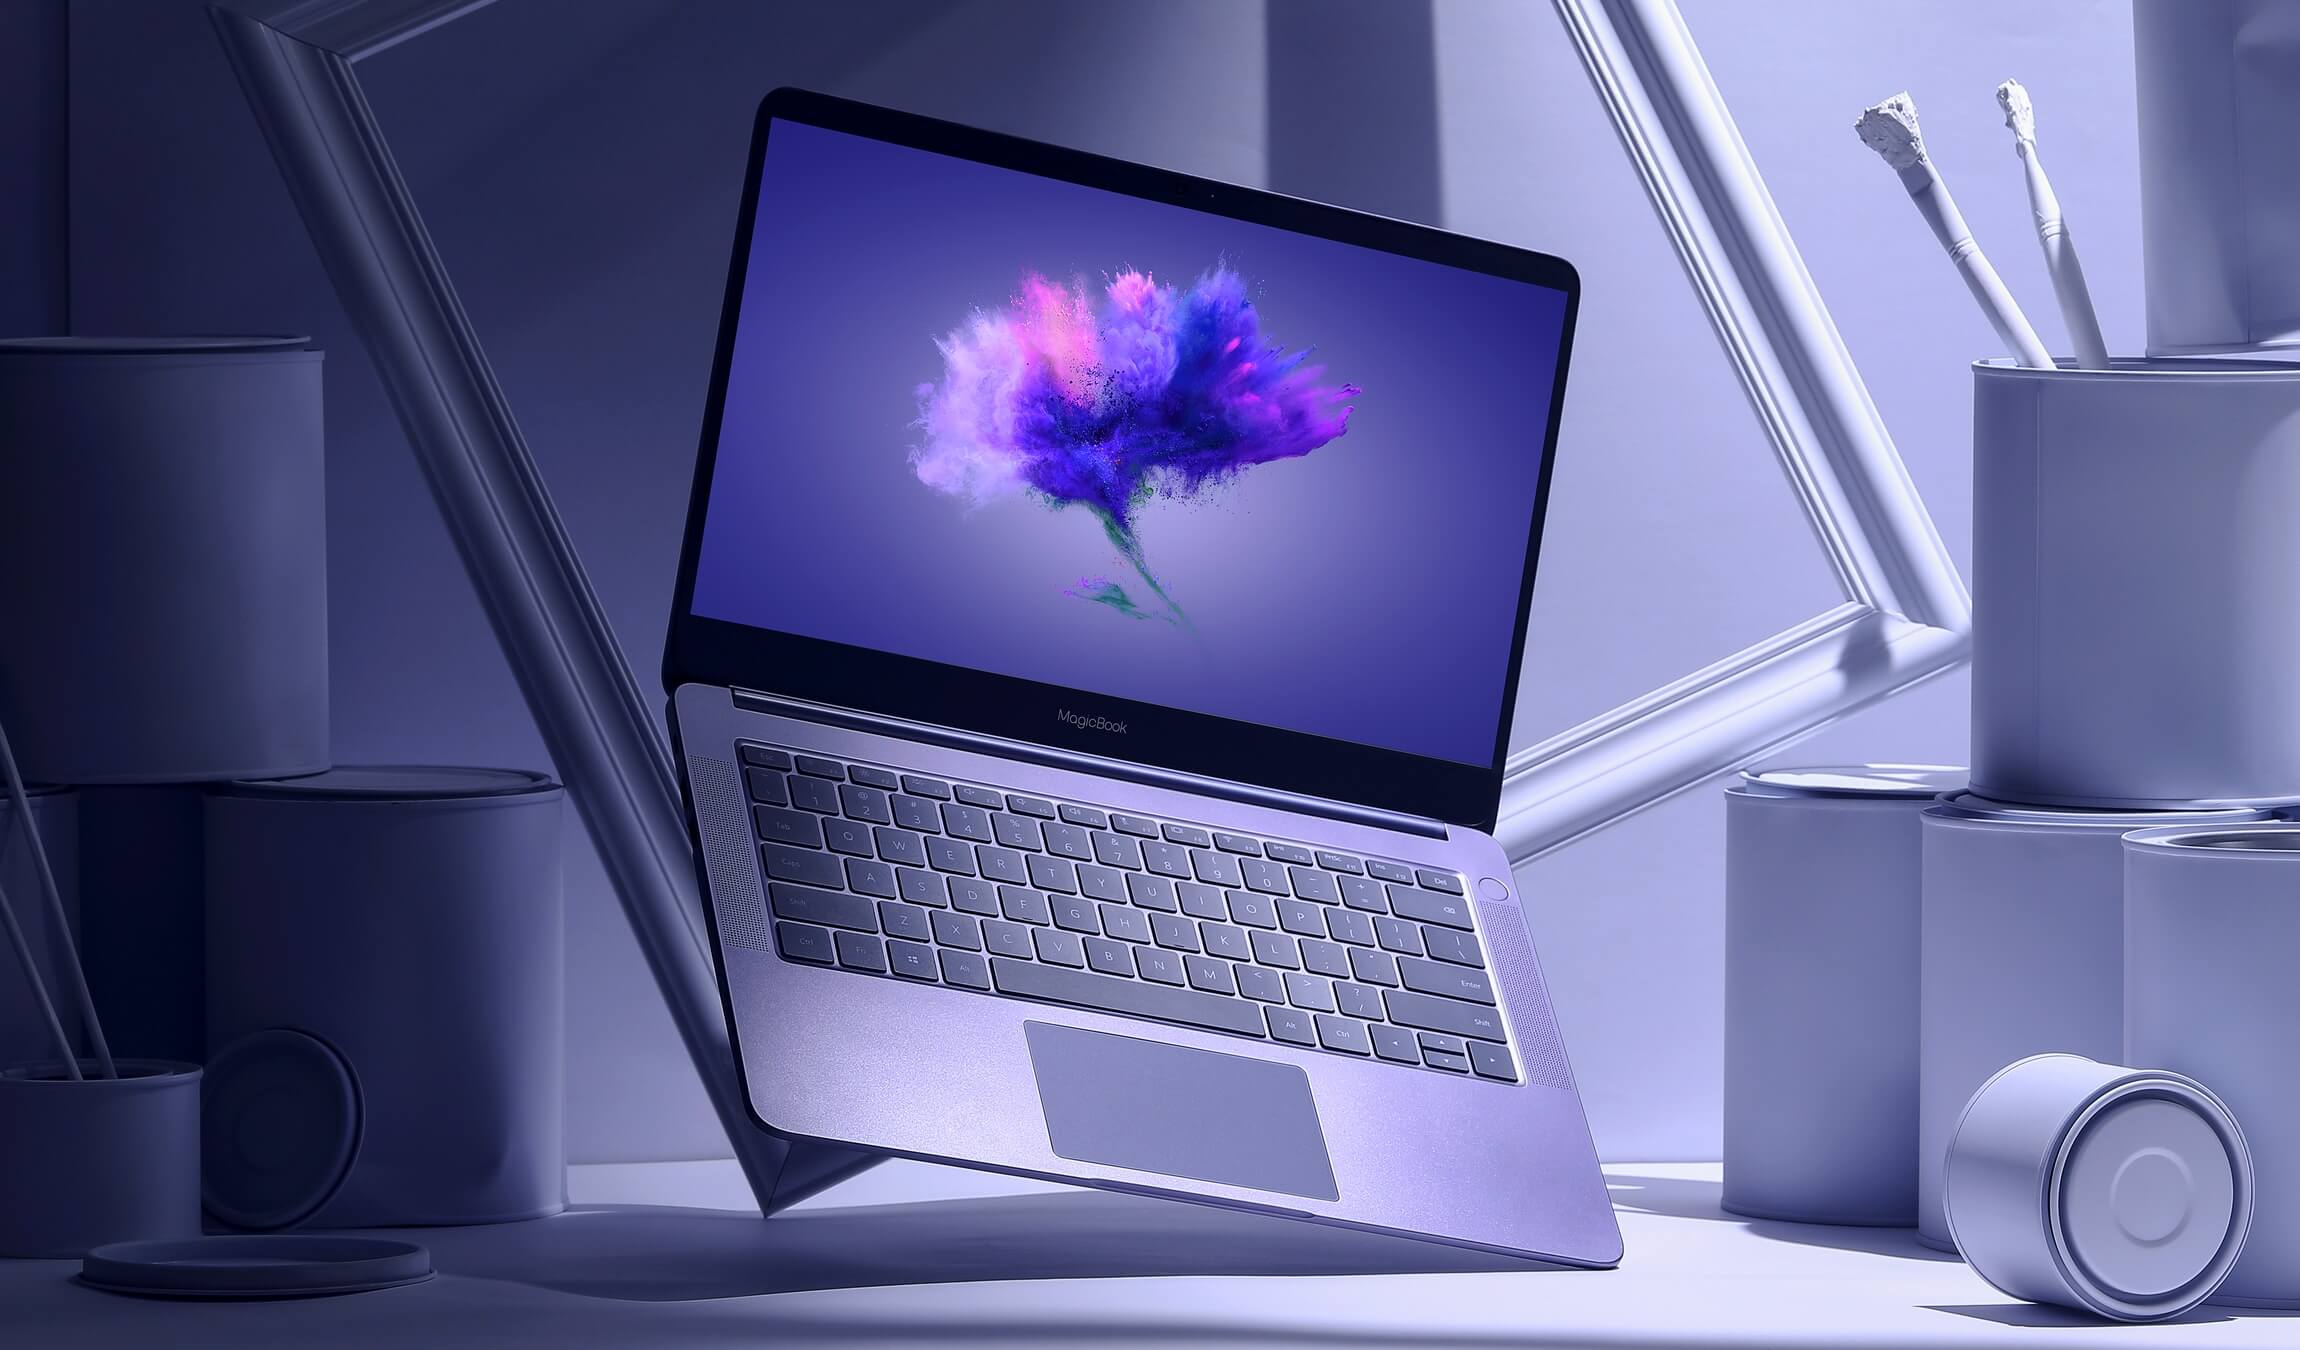 Honor magicbook x 16 pro 7840hs. MAGICBOOK 14 Pro. Ультрабук Honor MAGICBOOK. Ноутбук хонор MAGICBOOK 16. Ноутбук Honor MAGICBOOK 14.